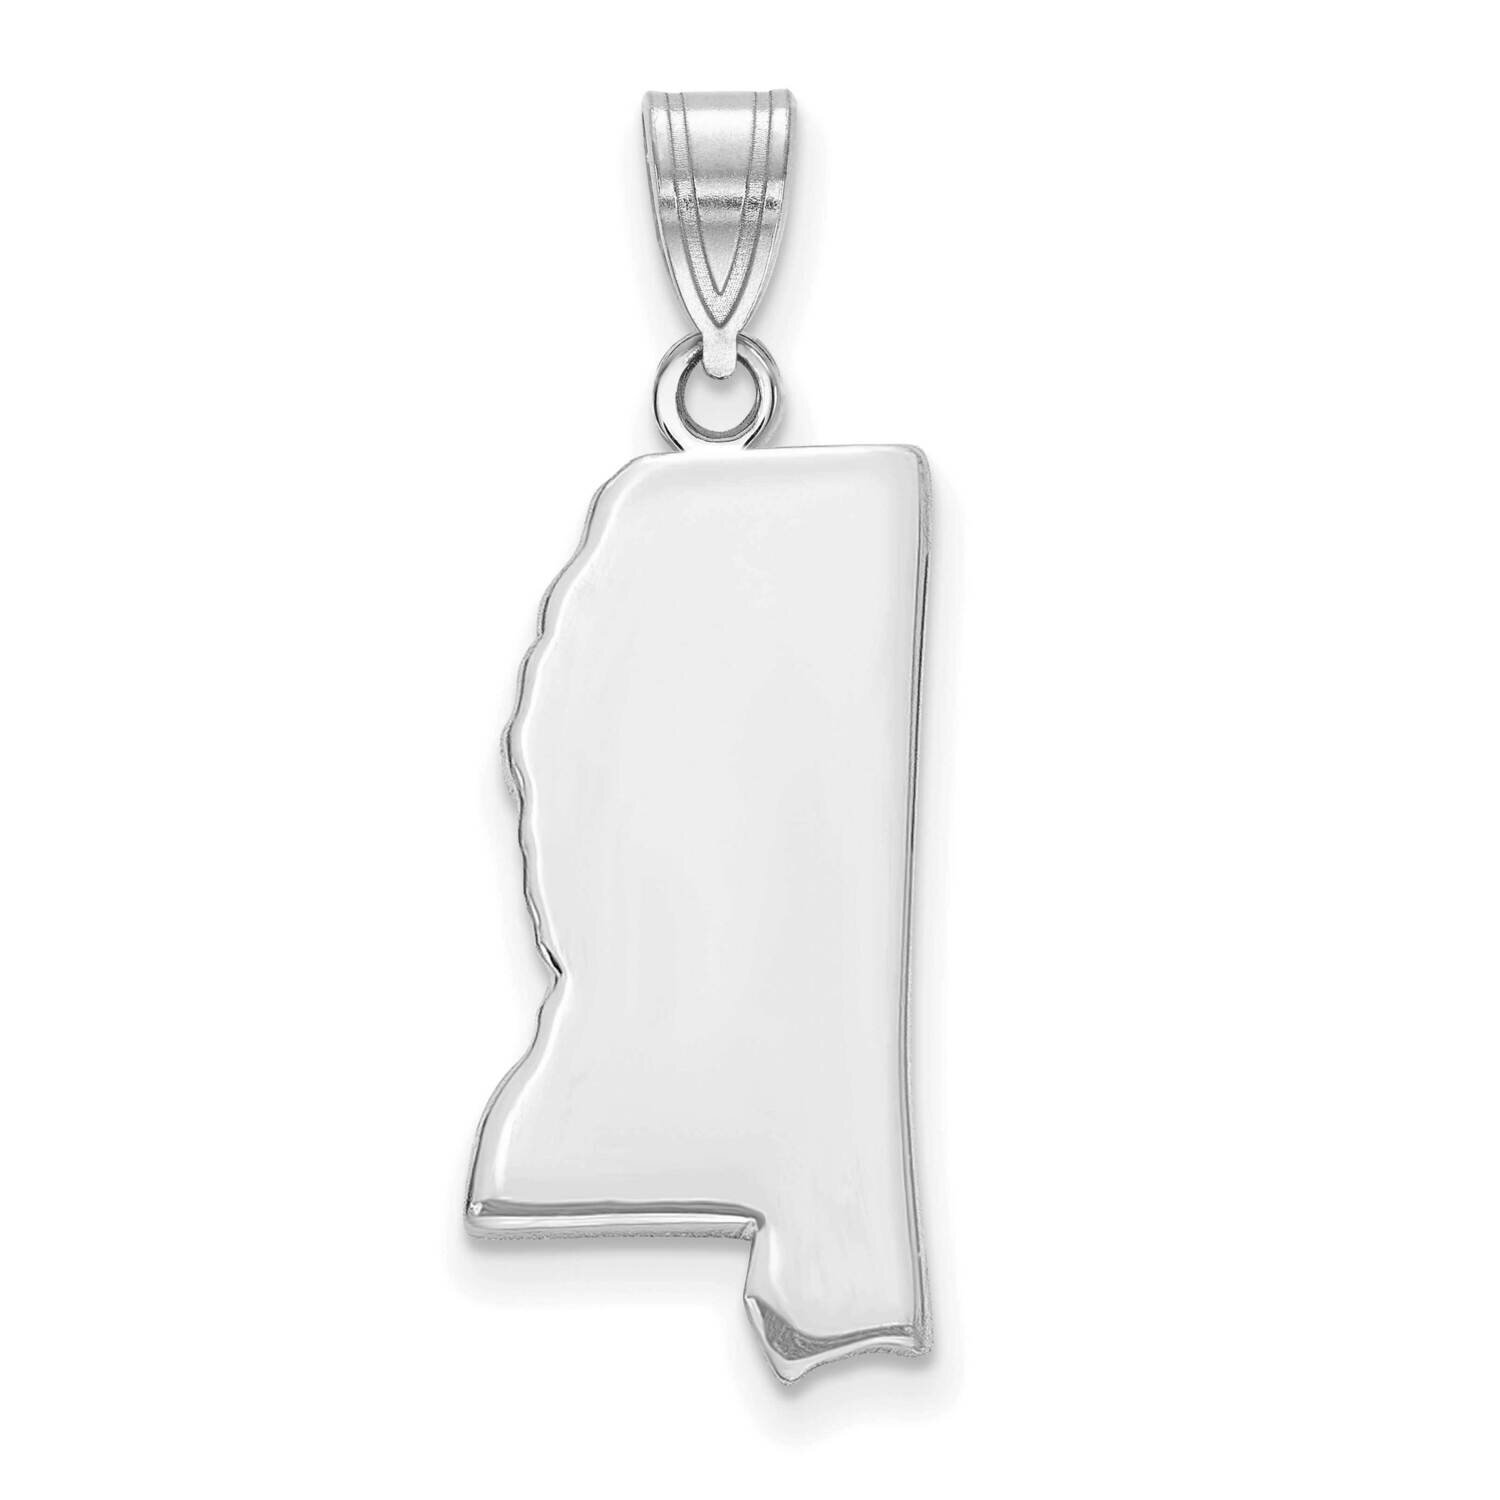 Ms State Pendant Bail Only 14k White Gold XNA707W-MS